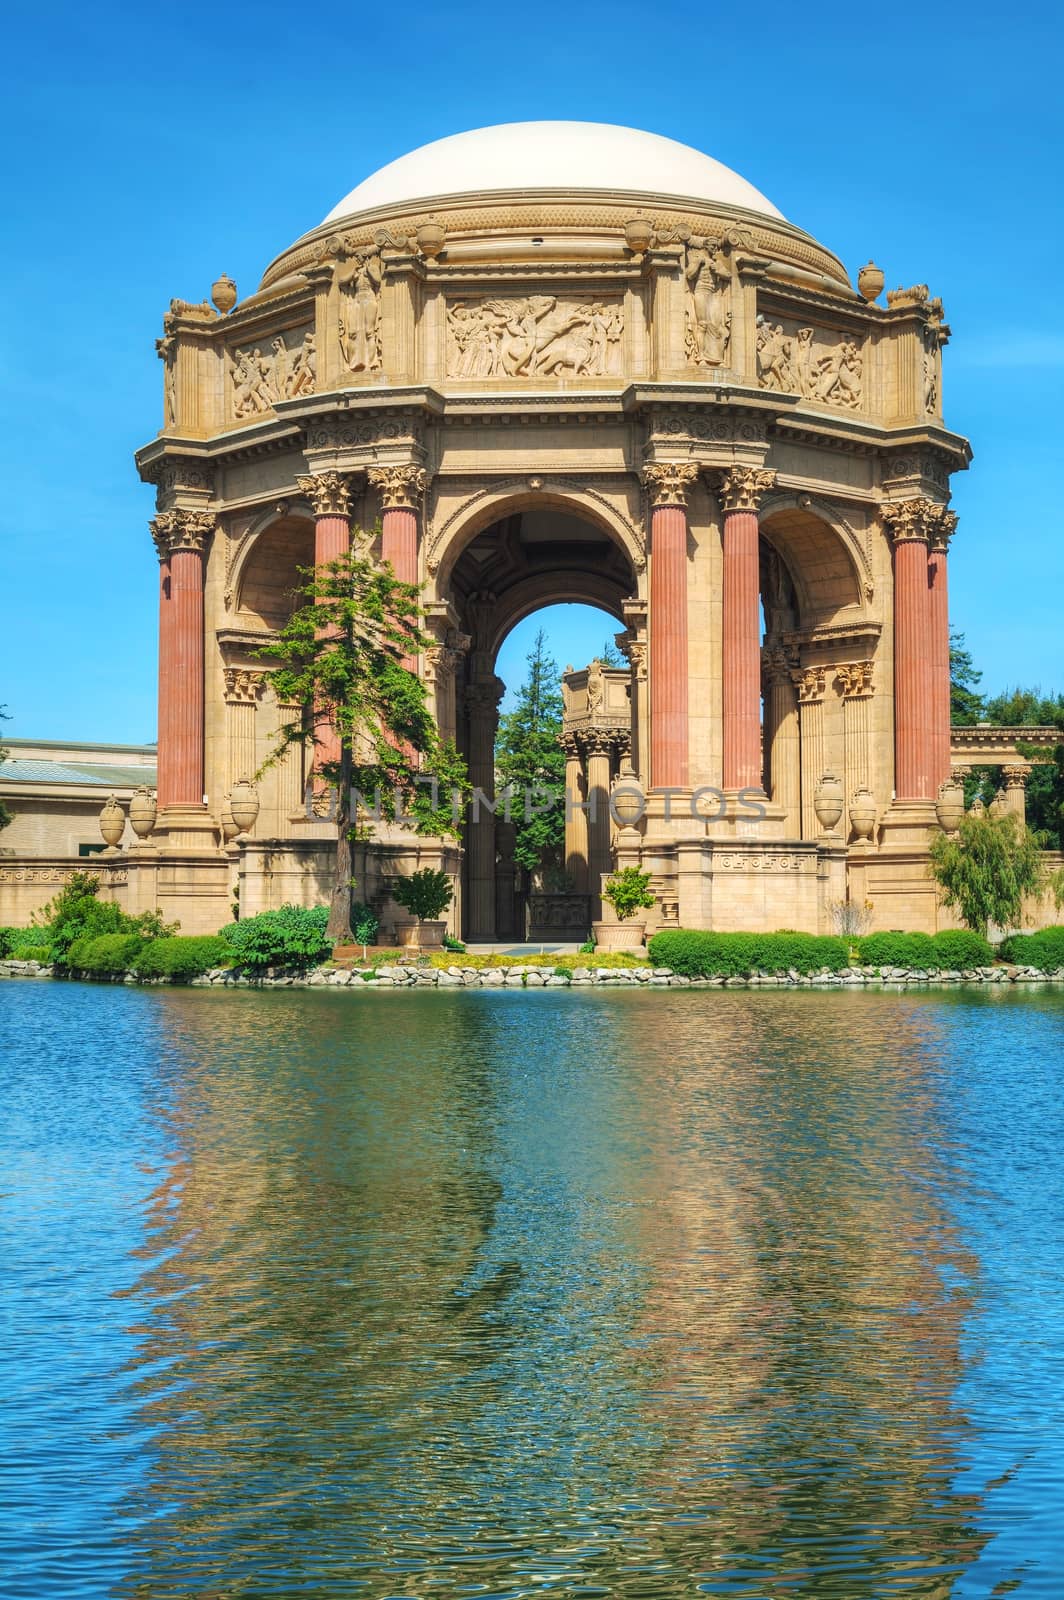 The Palace of Fine Arts in San Francisco by AndreyKr